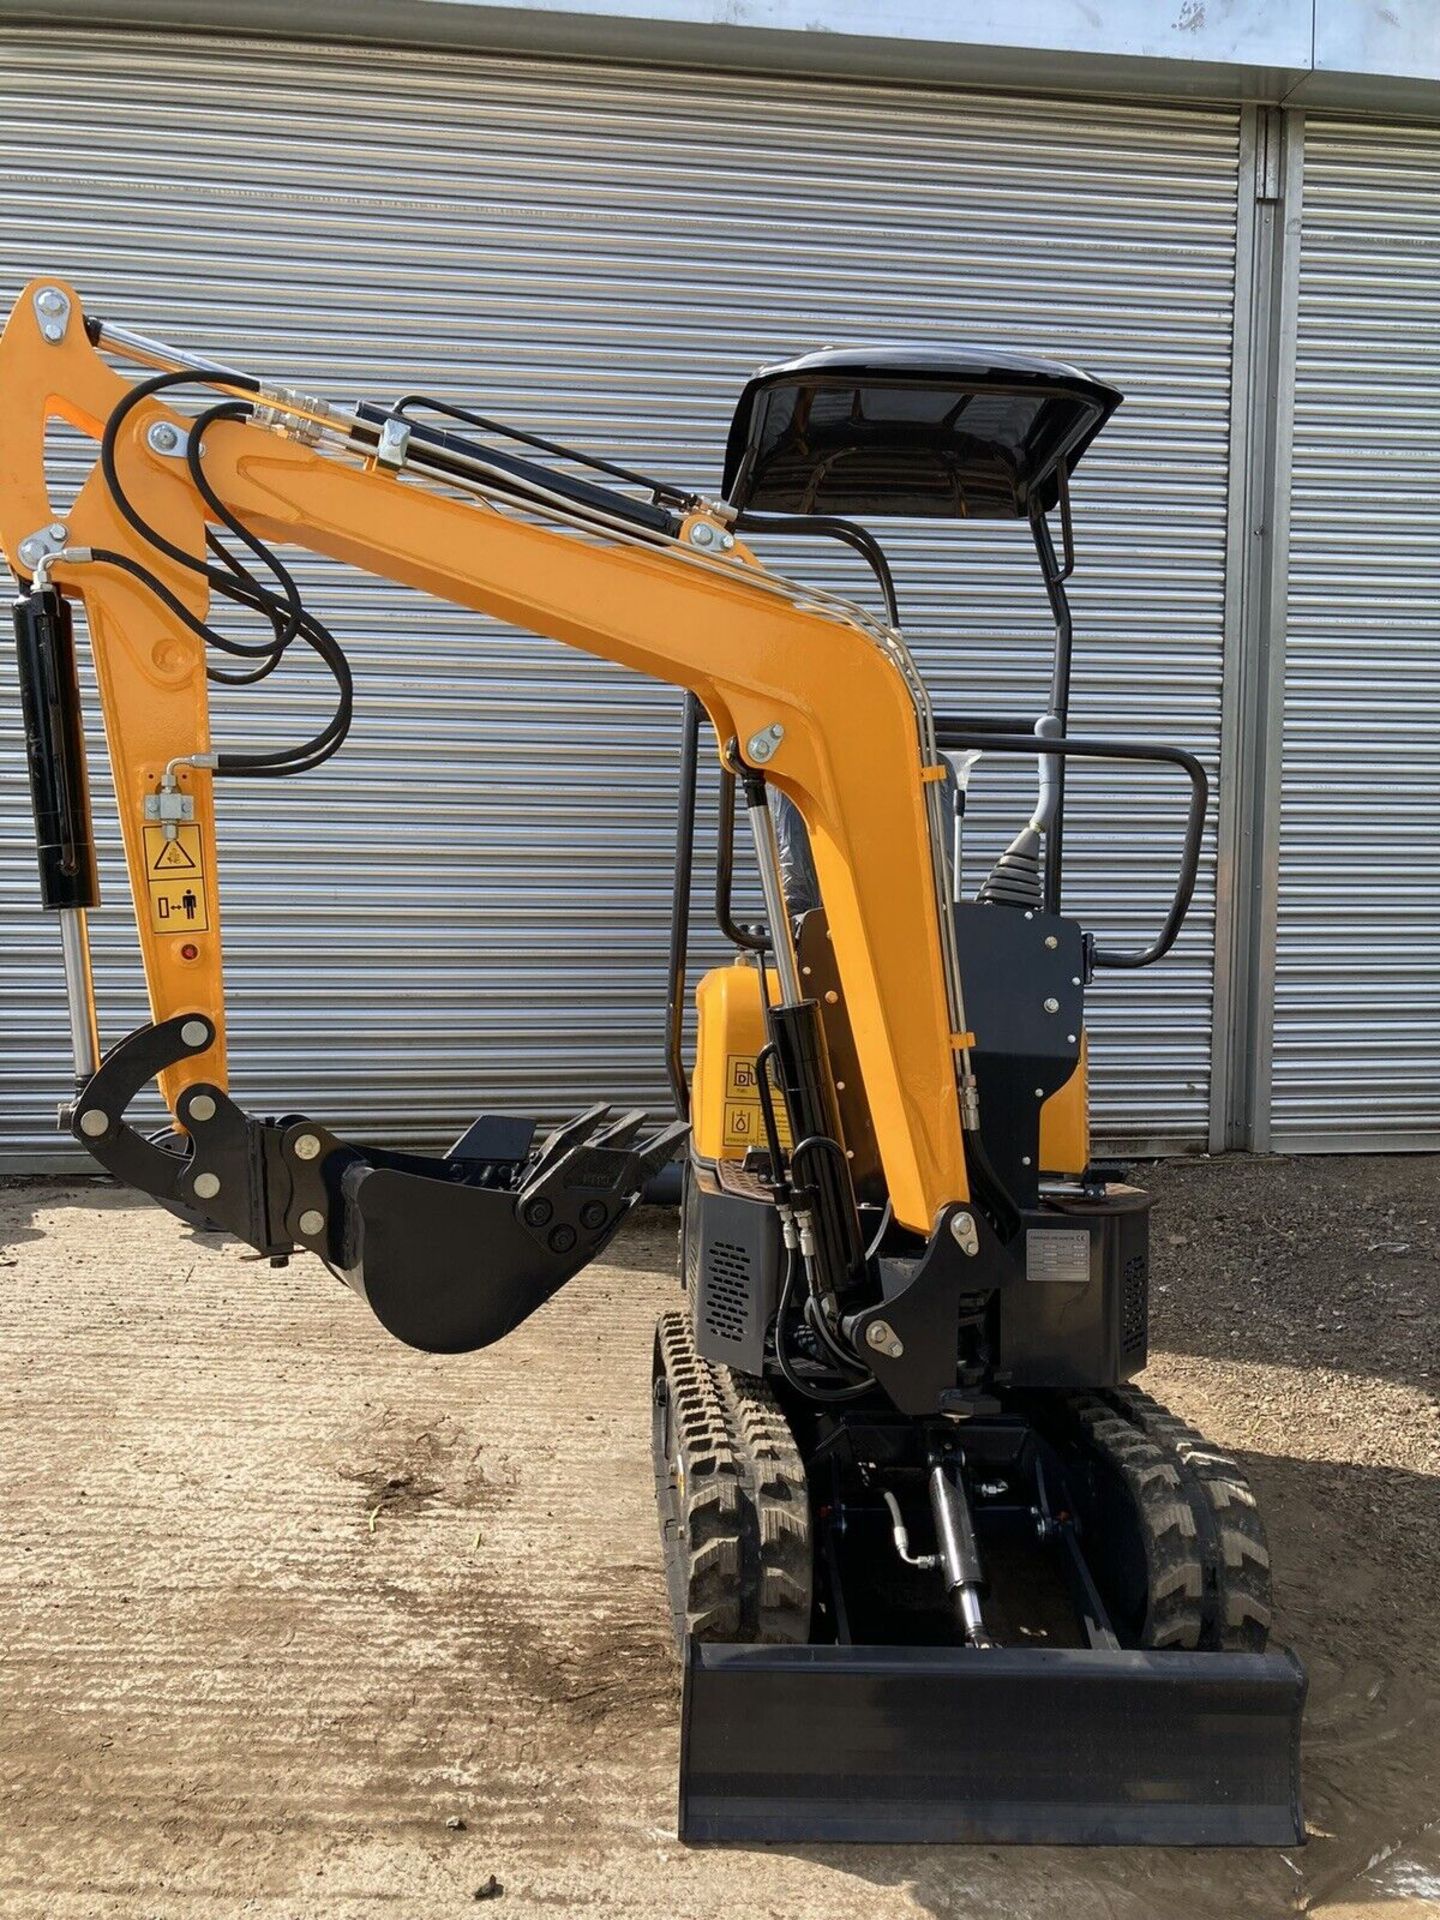 2023 POWER UNLEASHED: BRAND NEW 1 TONNE MICRO DIGGER - JCB, KUBOTA, AND MORE! - Image 5 of 12